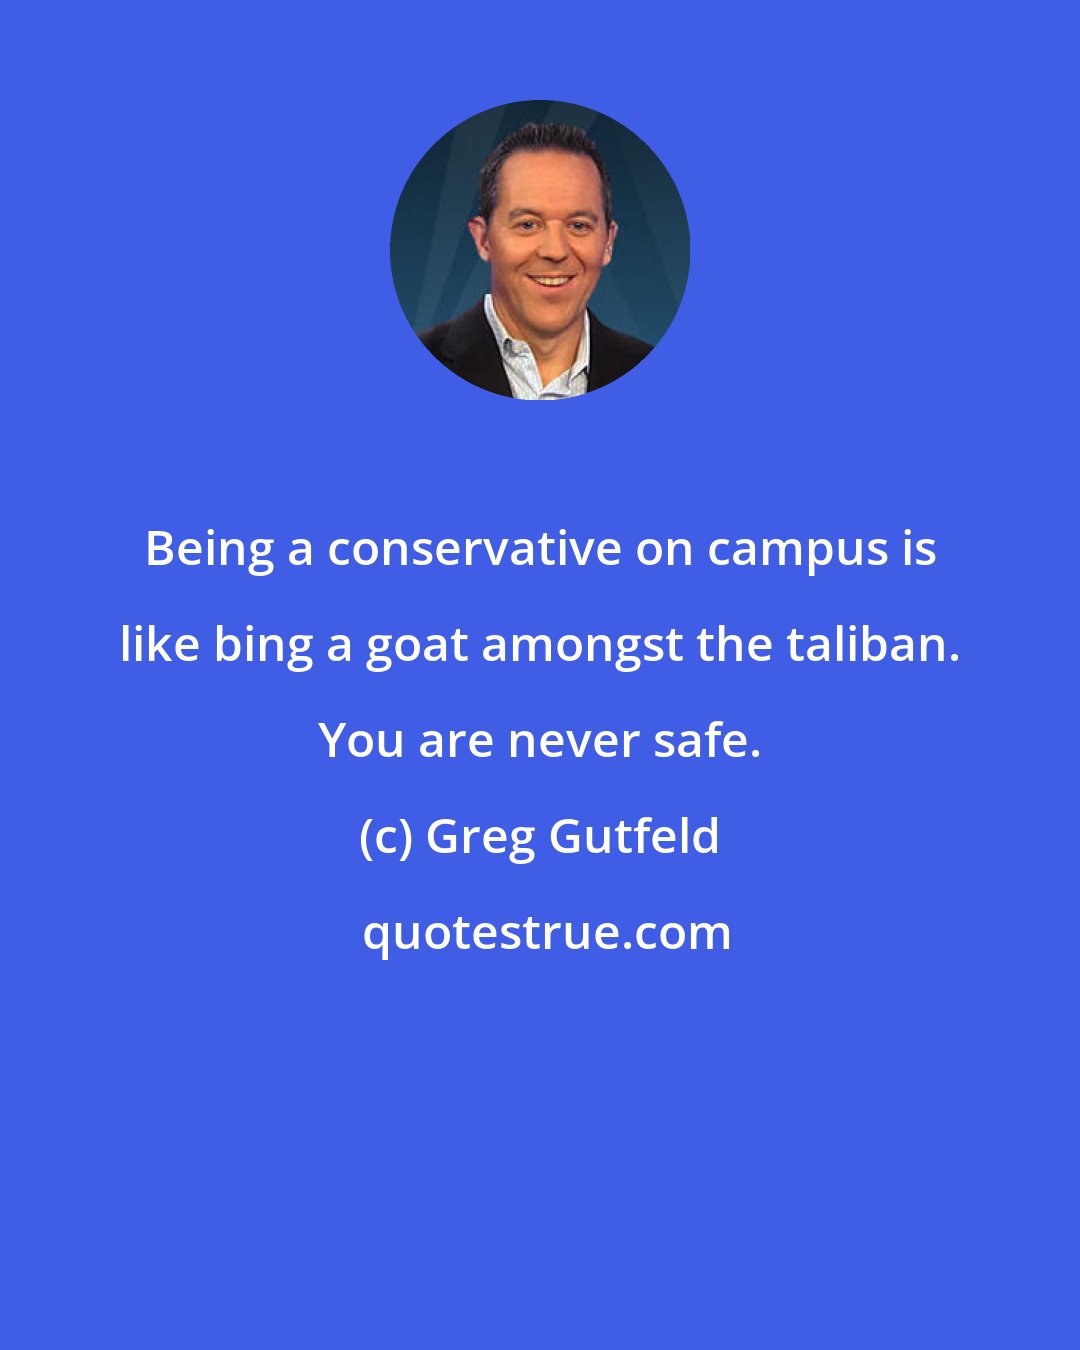 Greg Gutfeld: Being a conservative on campus is like bing a goat amongst the taliban. You are never safe.